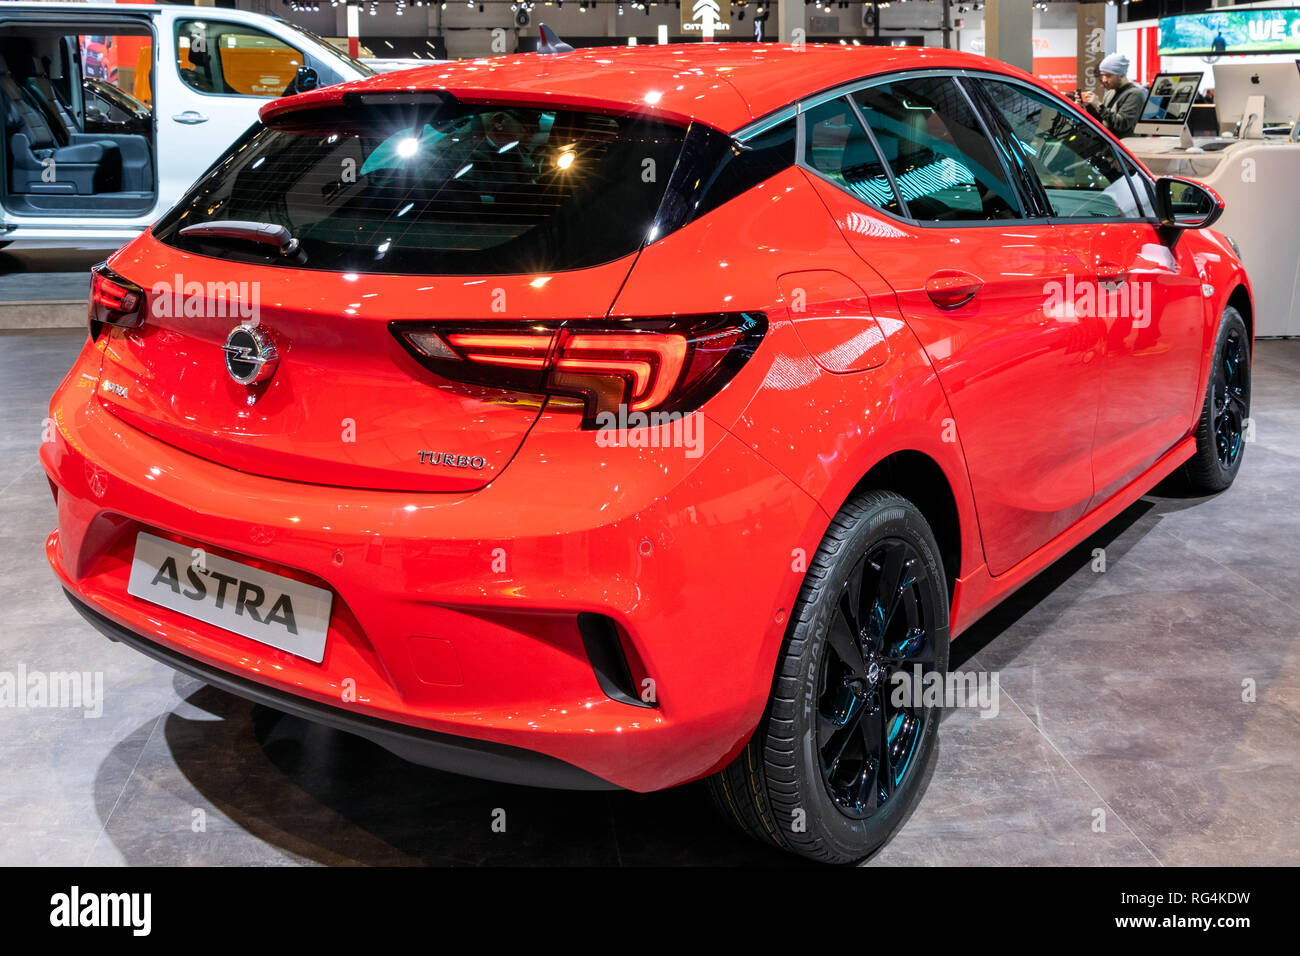 BRUSSELS - JAN 18, 2019: Opel Astra car showcased at the 97th Brussels Motor Show 2019 Autosalon. Stock Photo